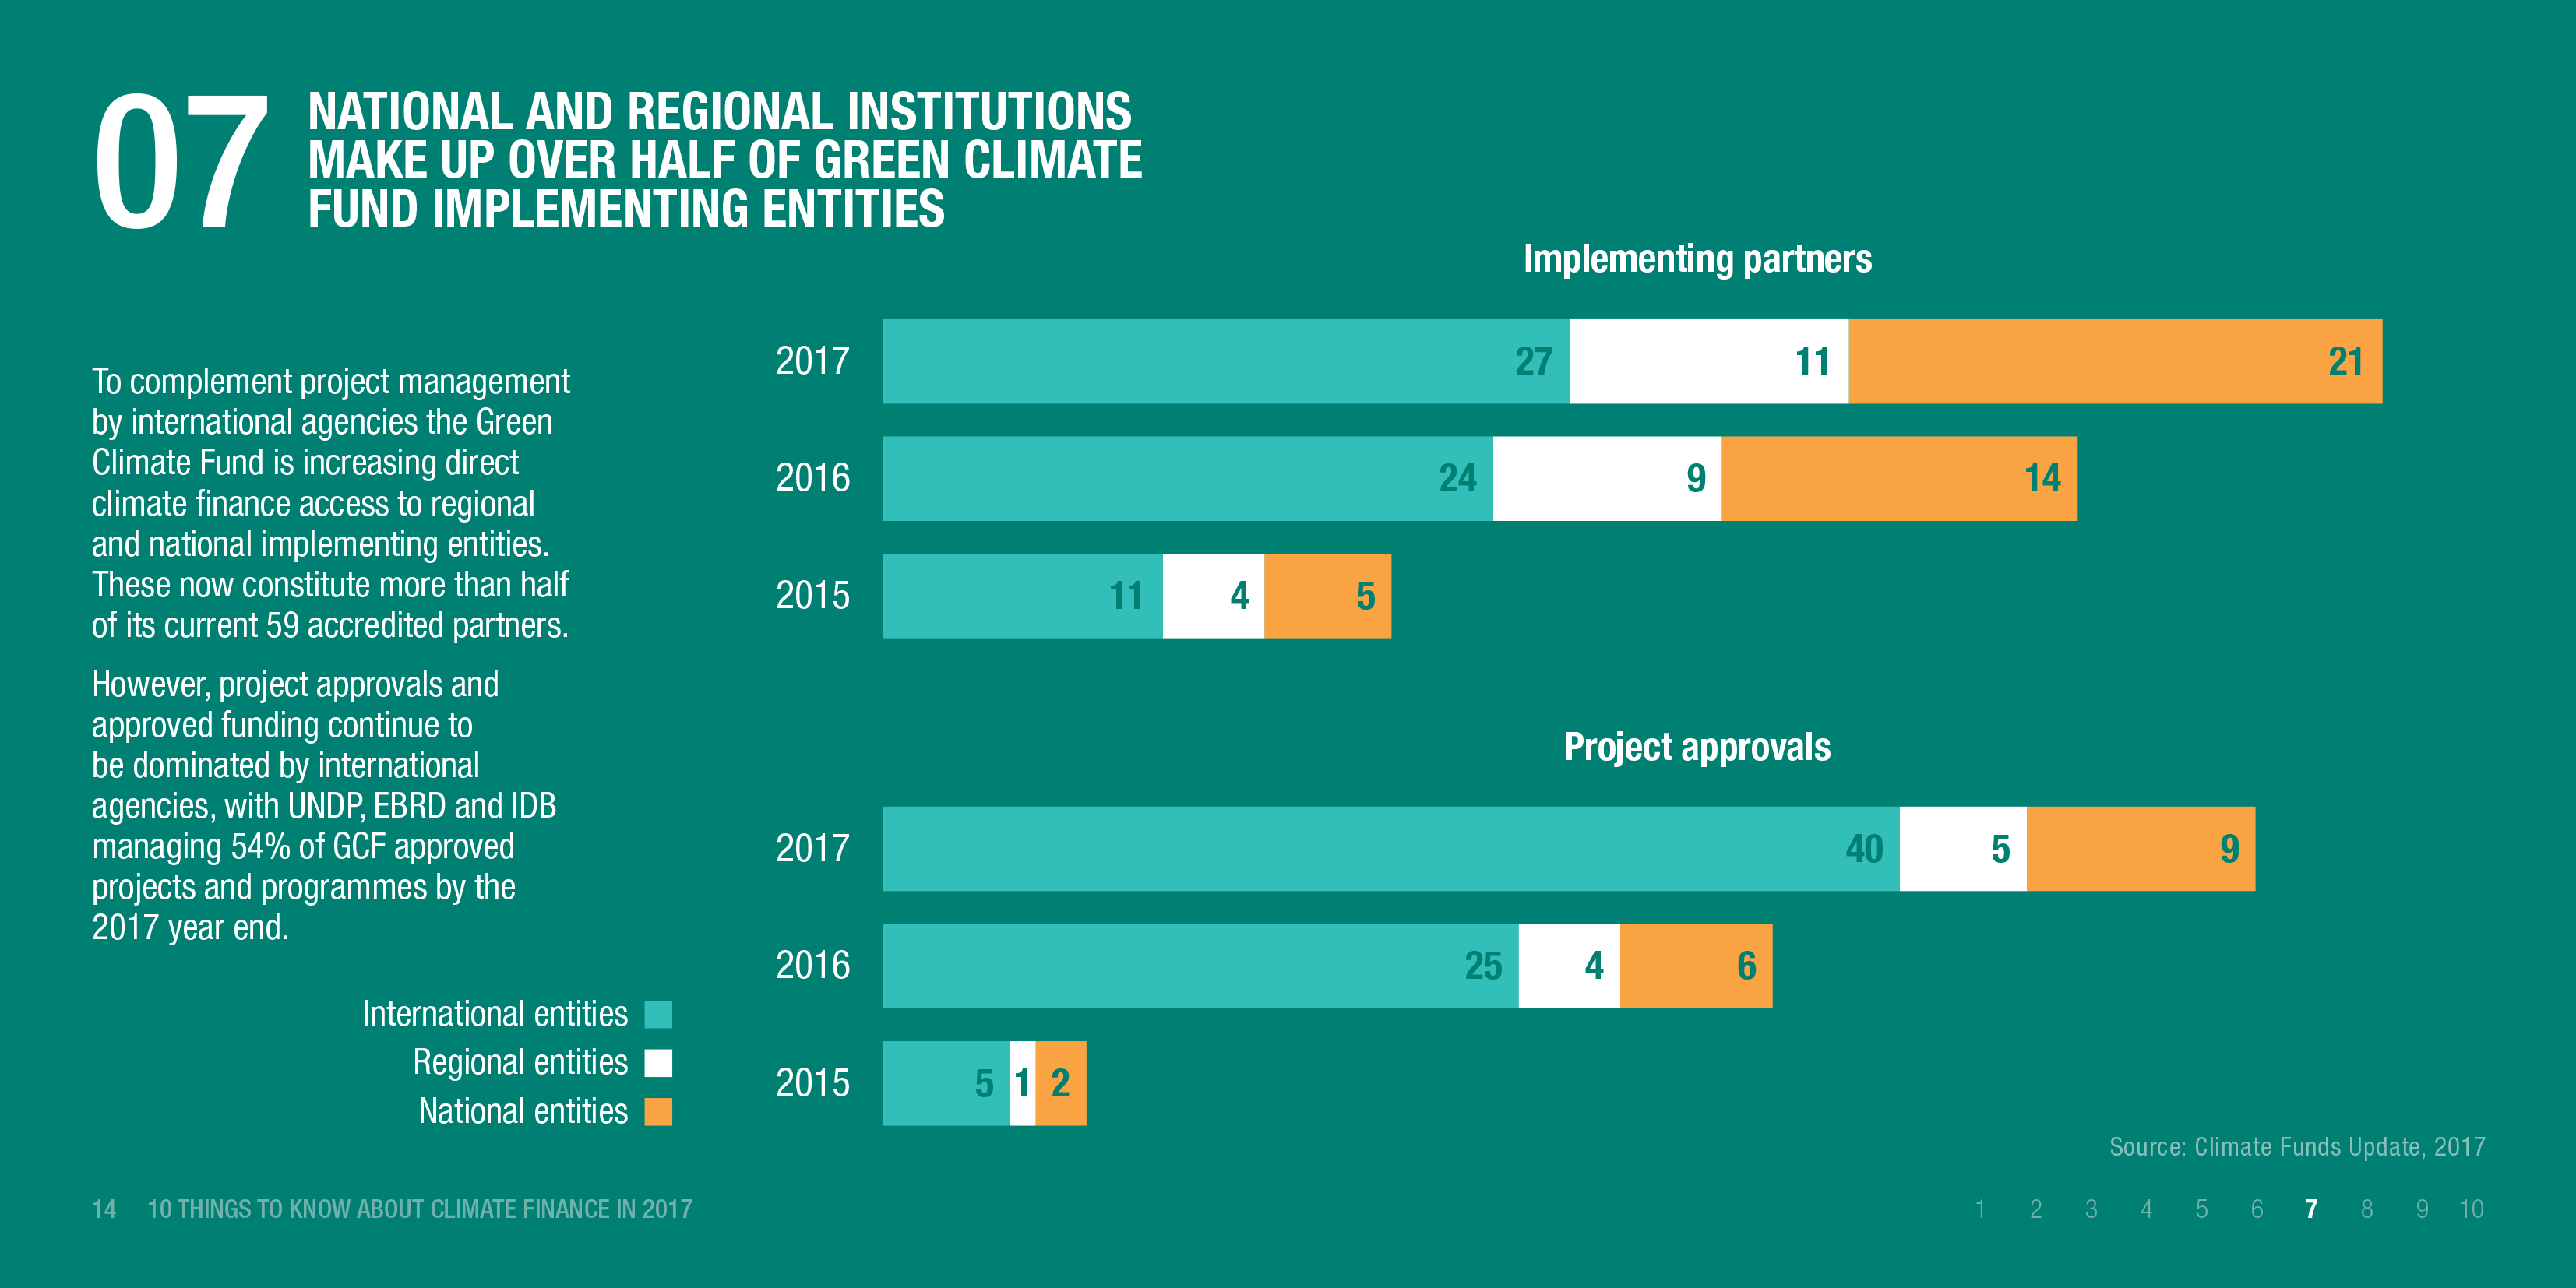 Infographic: National and regional institutions make up over half of Green Climate Fund implementing entities